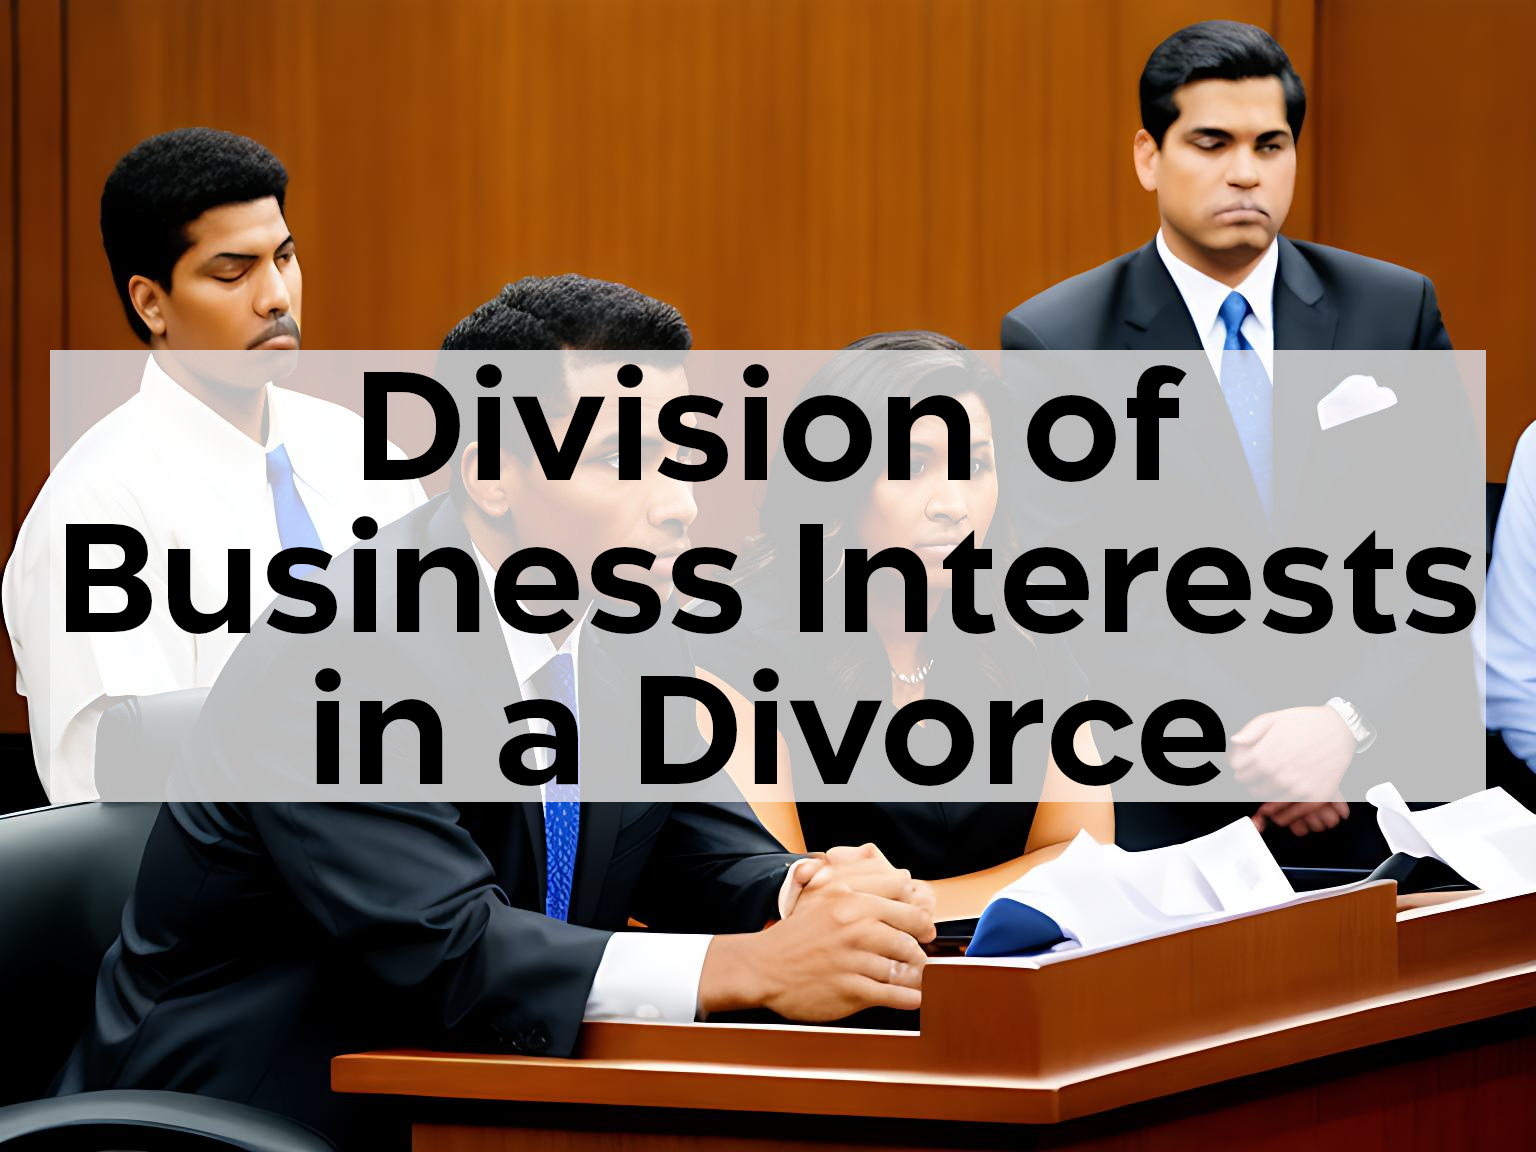 You are currently viewing Division of Business Interests in a Divorce